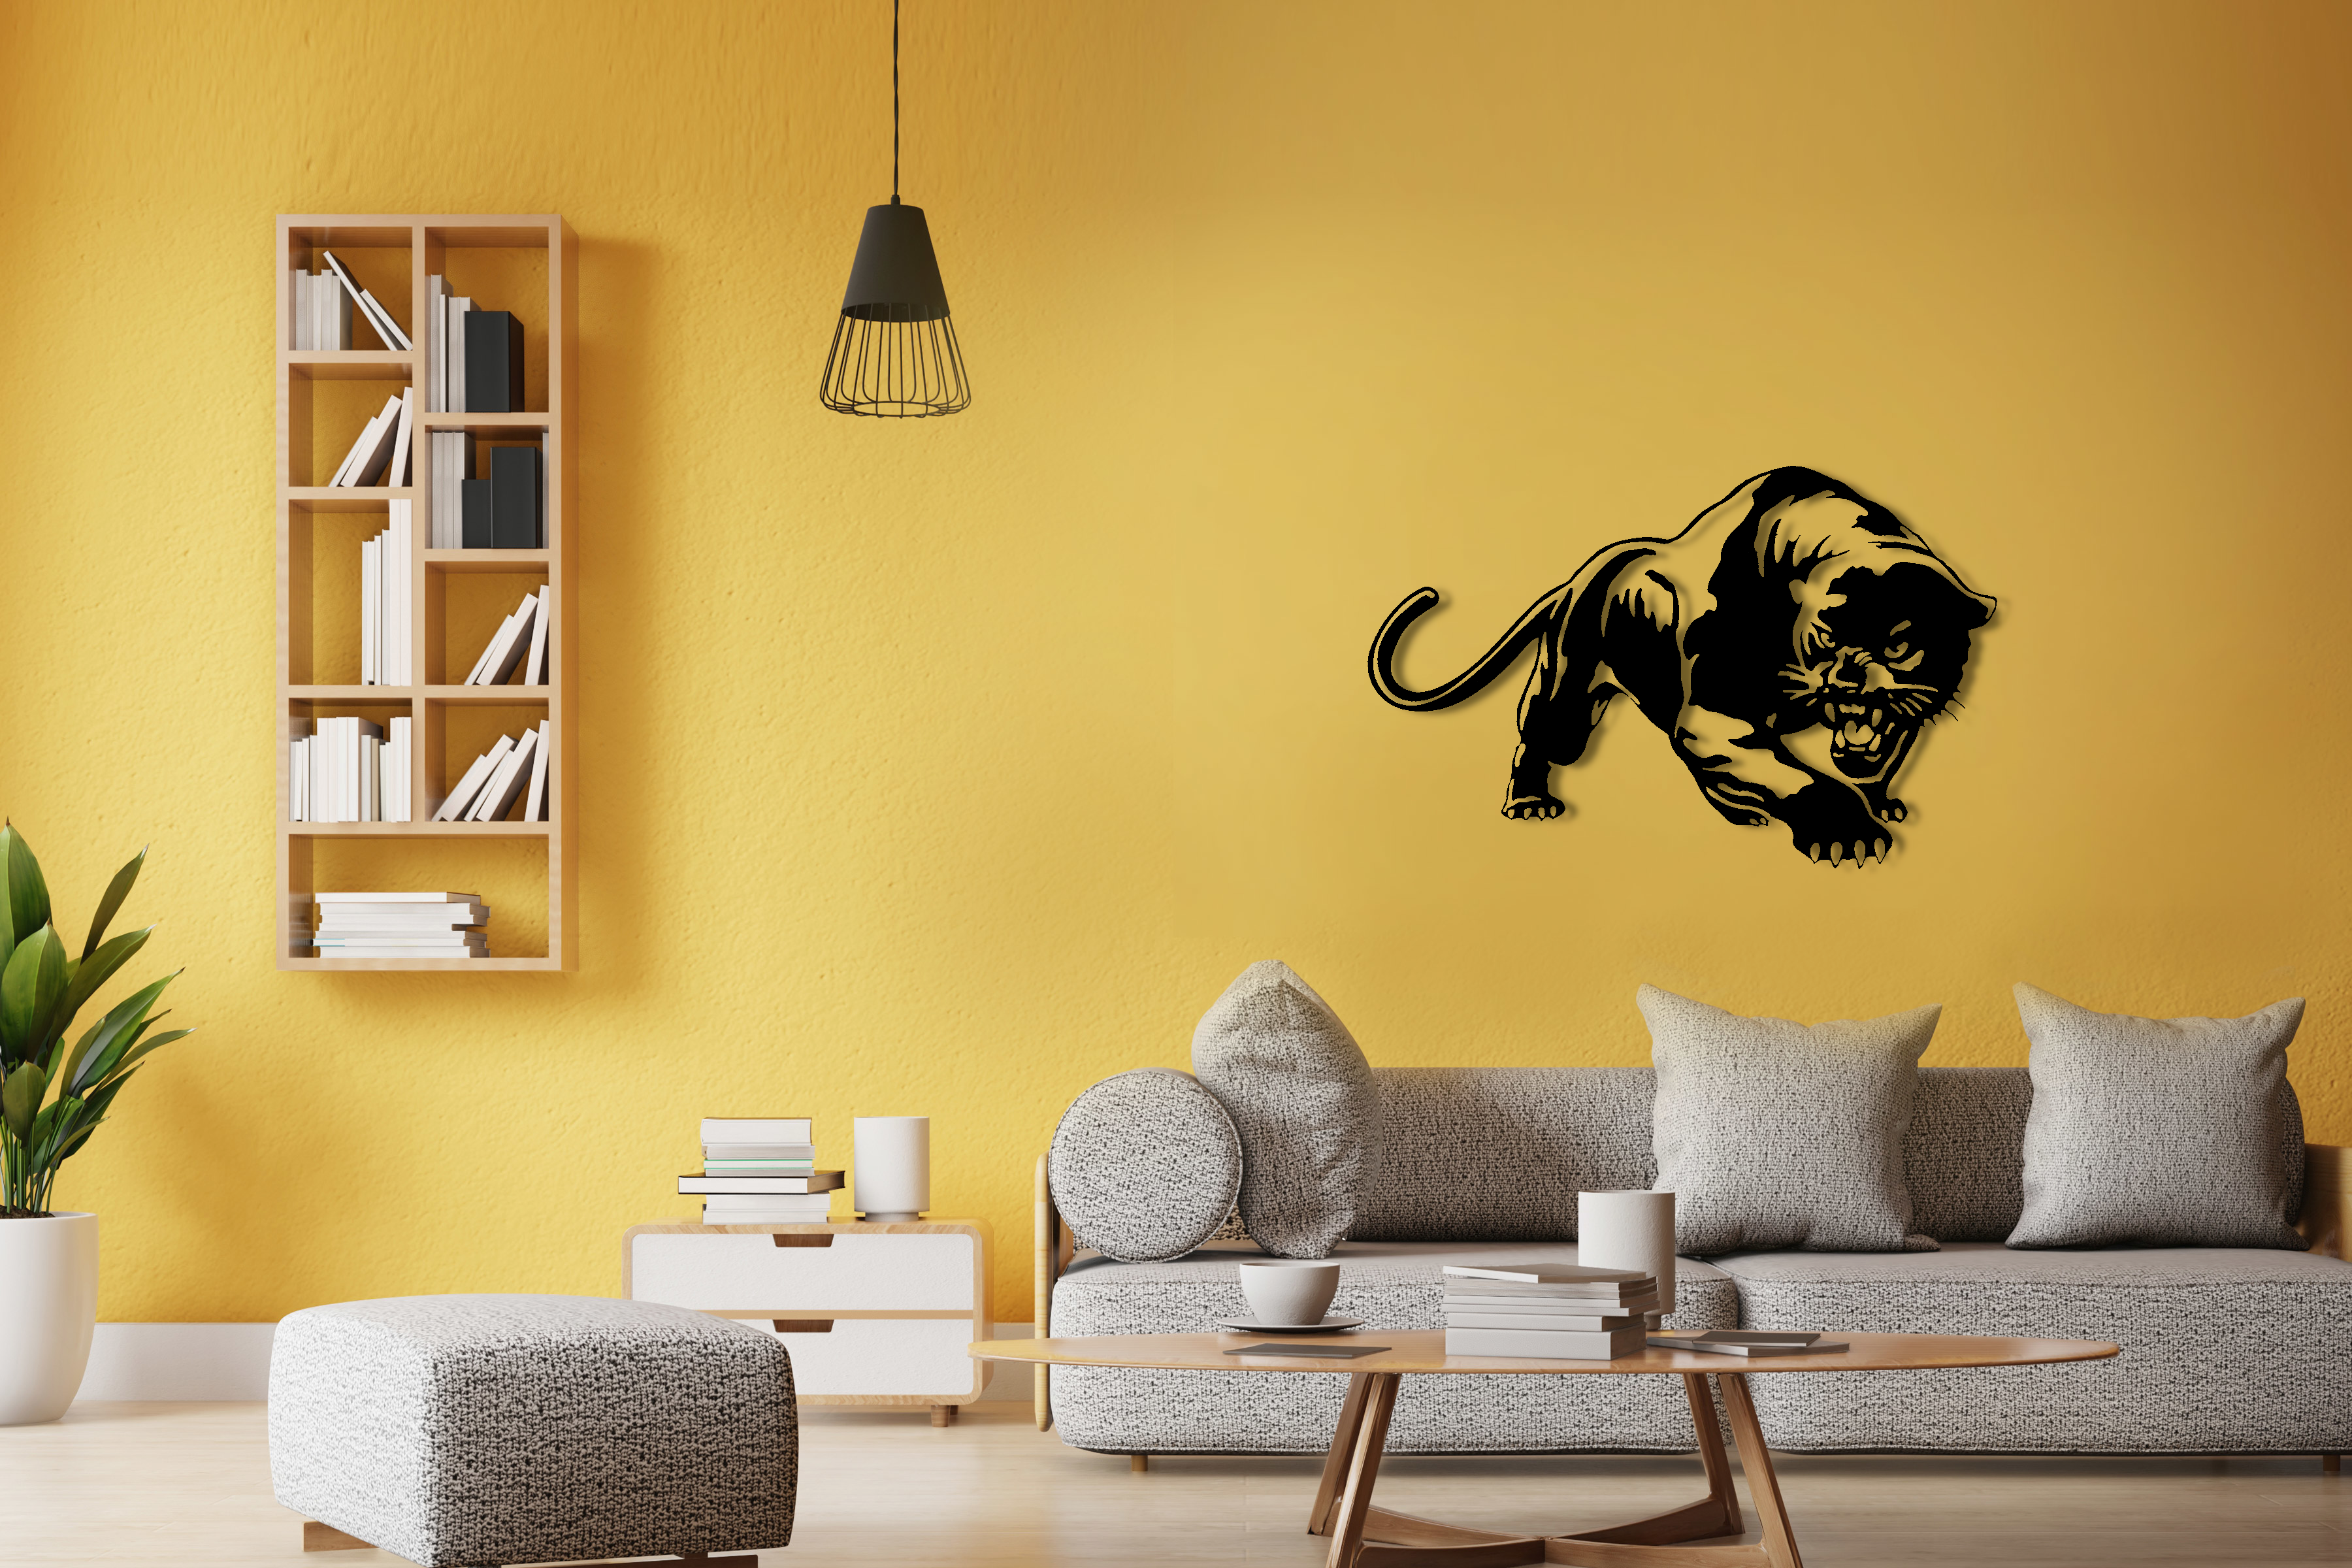 ・"Panther"・Premium Metal Wall Art - Limited Edition